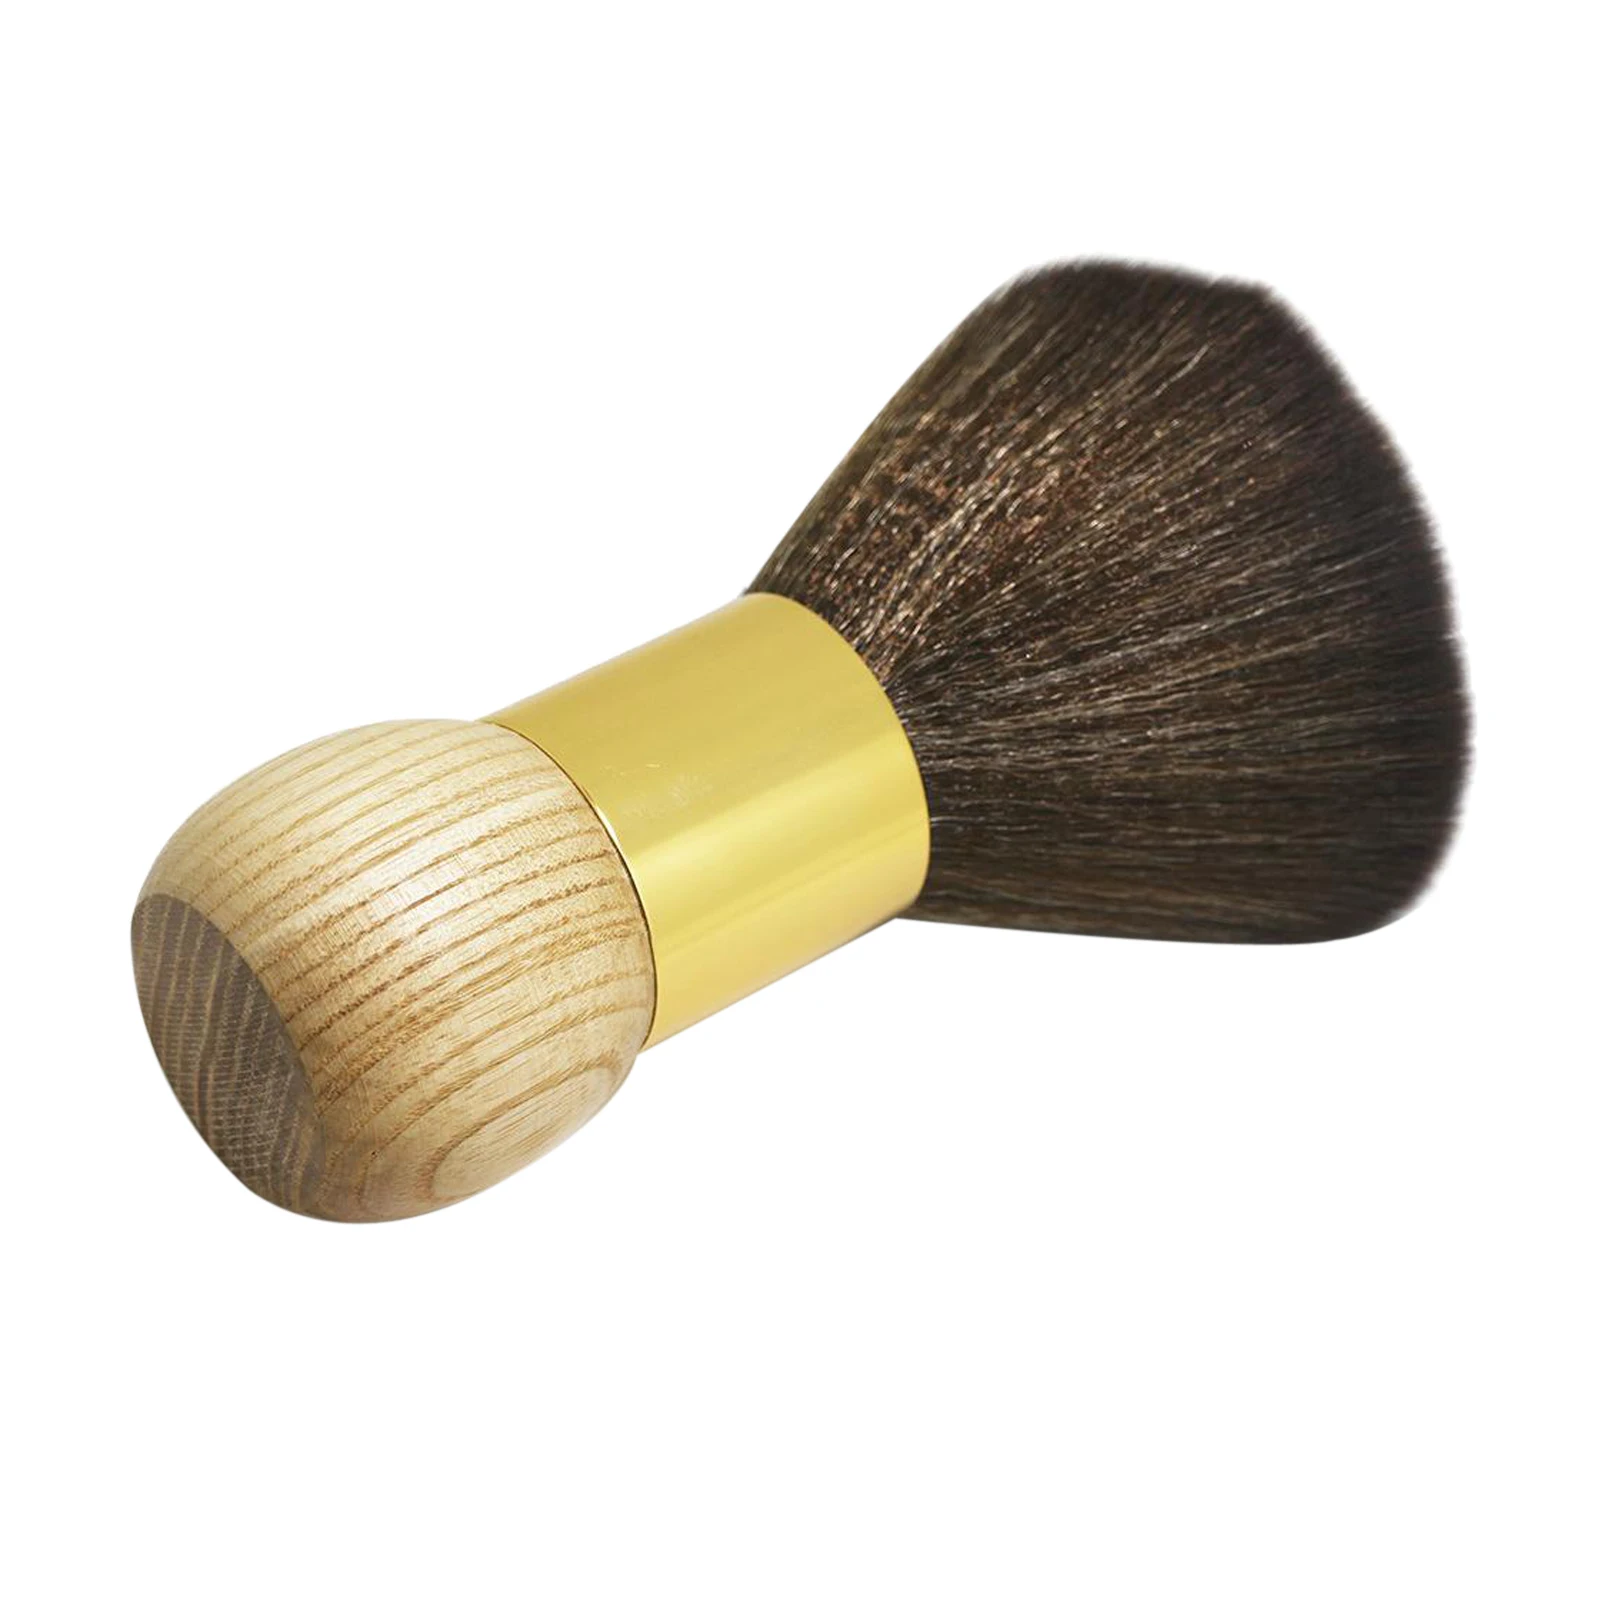 Soft Handle Wooden Hairbrush Haircut for Salon Barber Hairdressing Cleaning